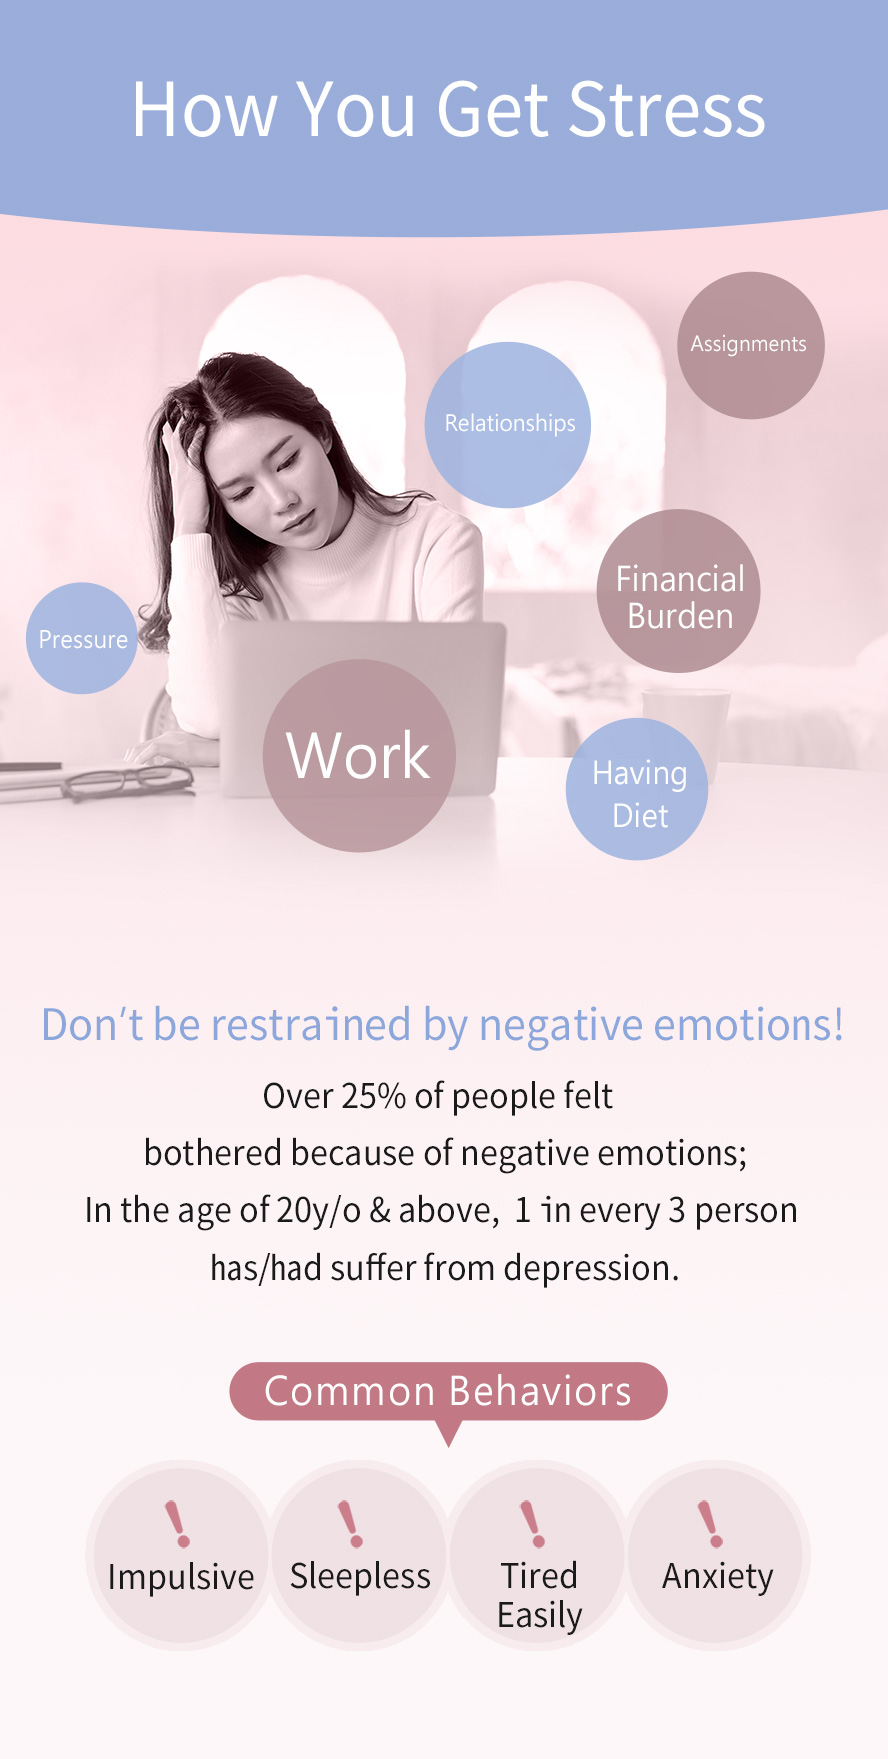 Over 25% of people bear with negative emotions & depression that lead to impulsive, insomnia, getting tired easily, and anxiety